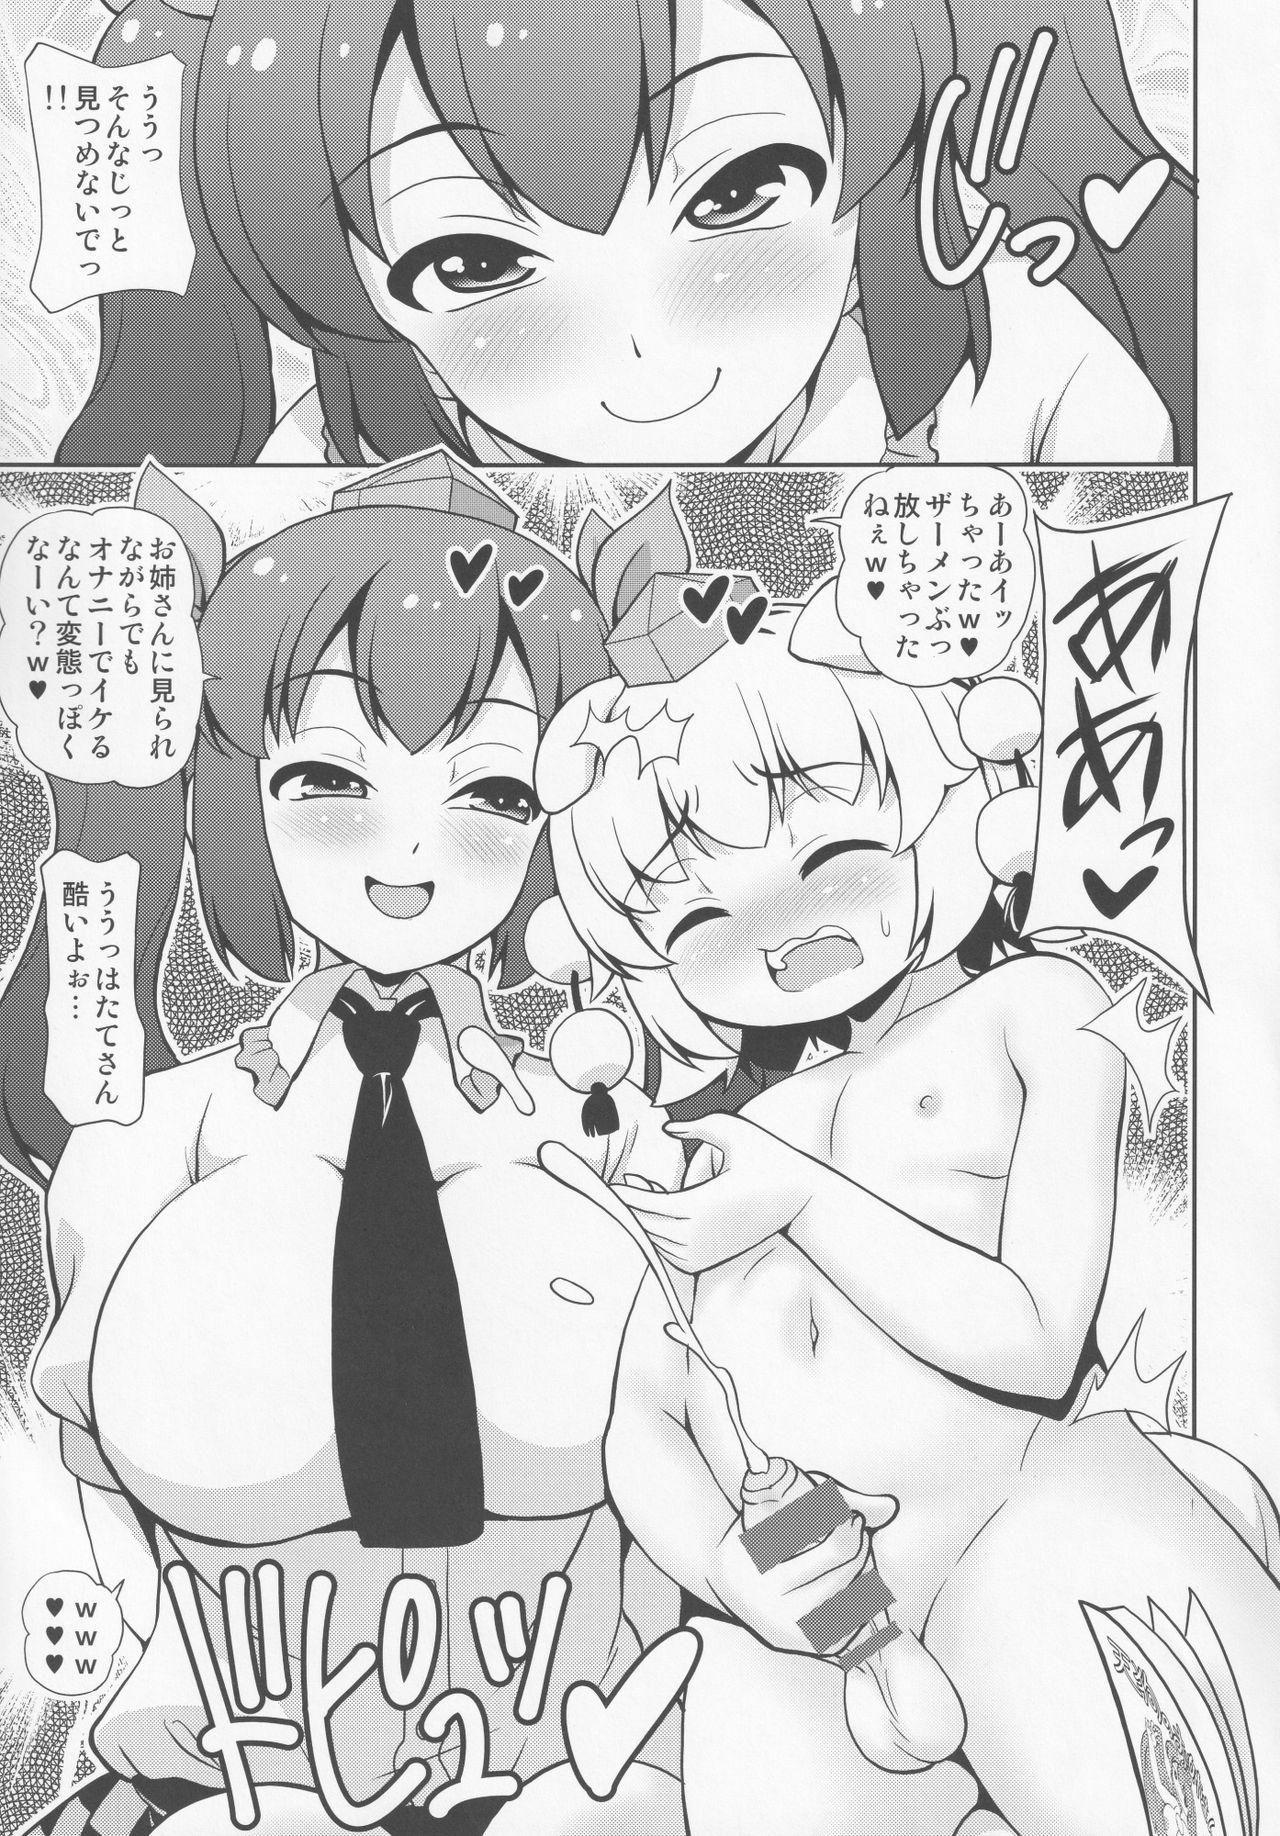 Vietnamese tease - Touhou project People Having Sex - Page 4